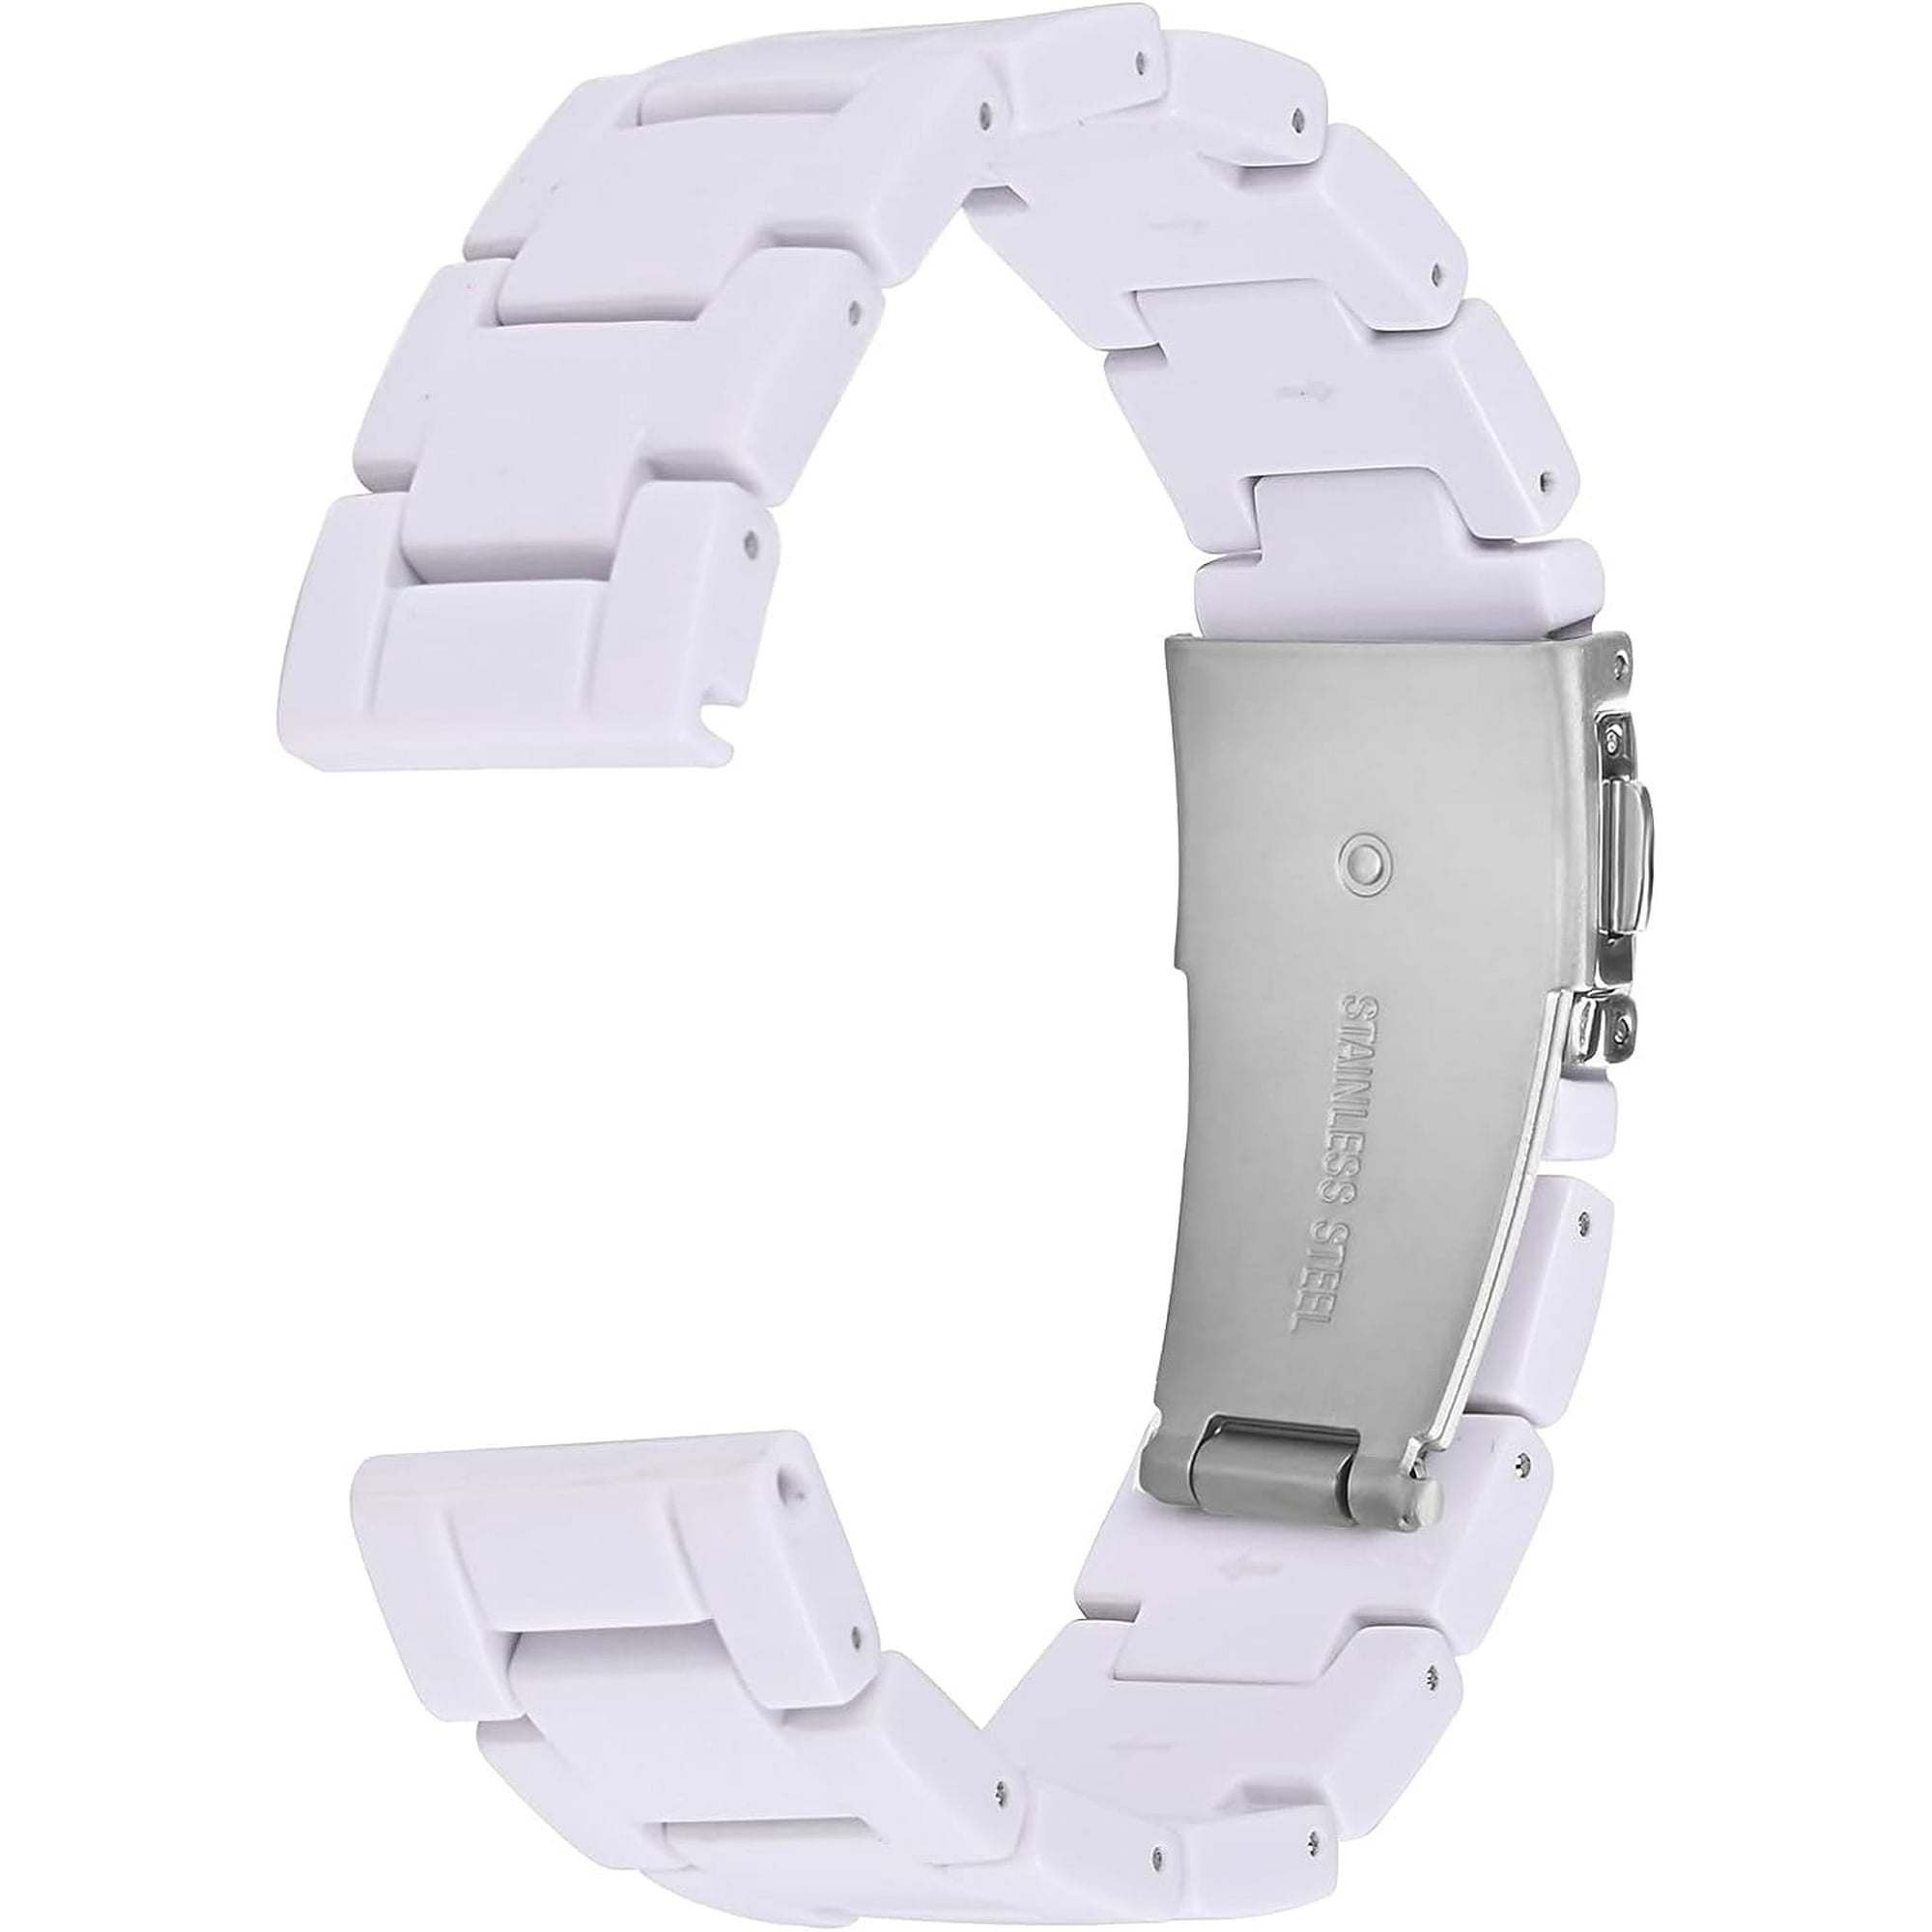  C2D JOY Stainless Steel Straps Compatible with Garmin